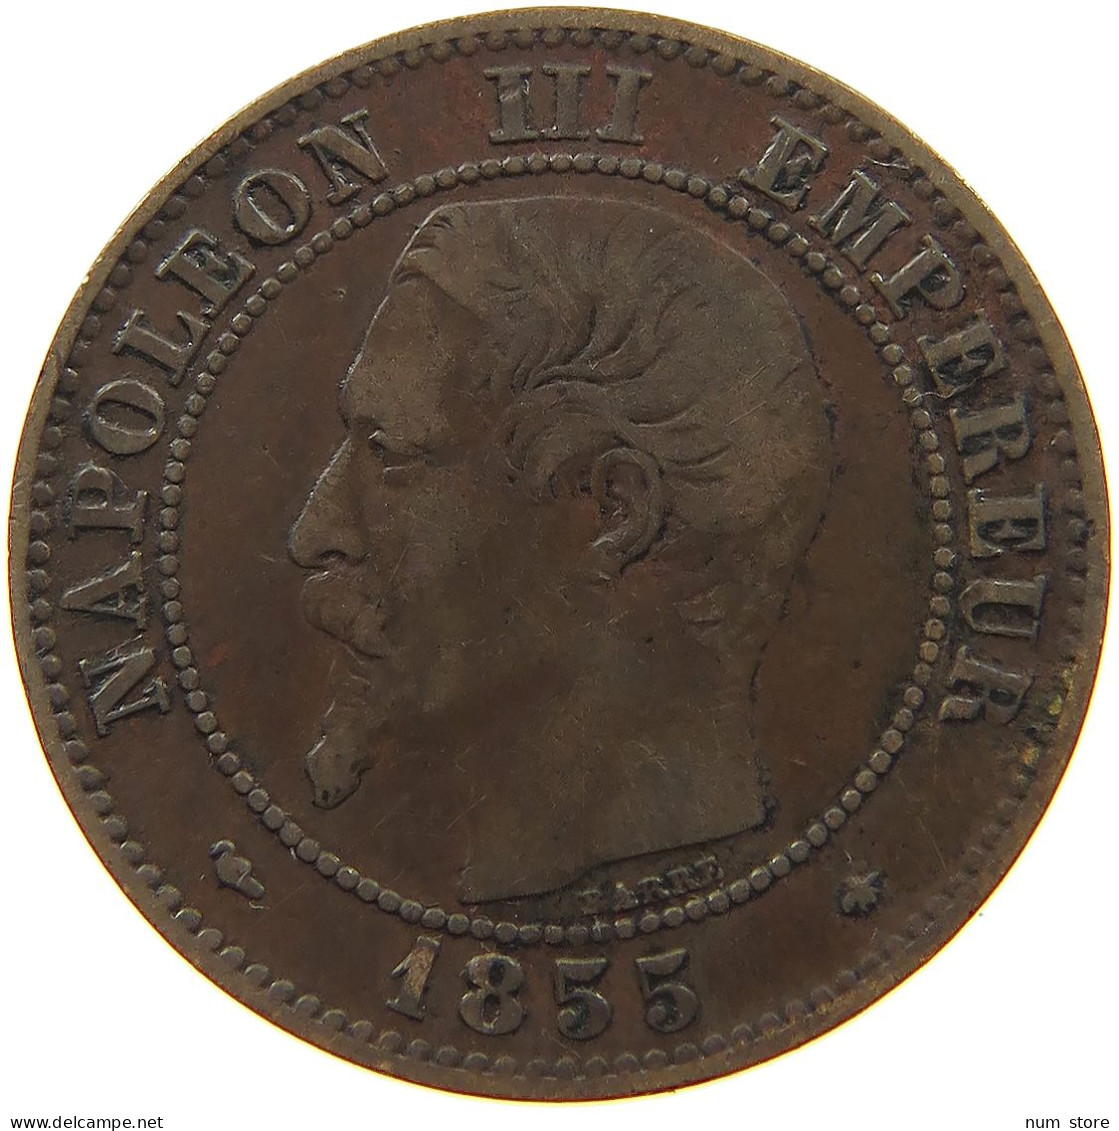 FRANCE 2 CENTIMES 1855 BB Napoleon III. (1852-1870) #a012 0551 - 2 Centimes